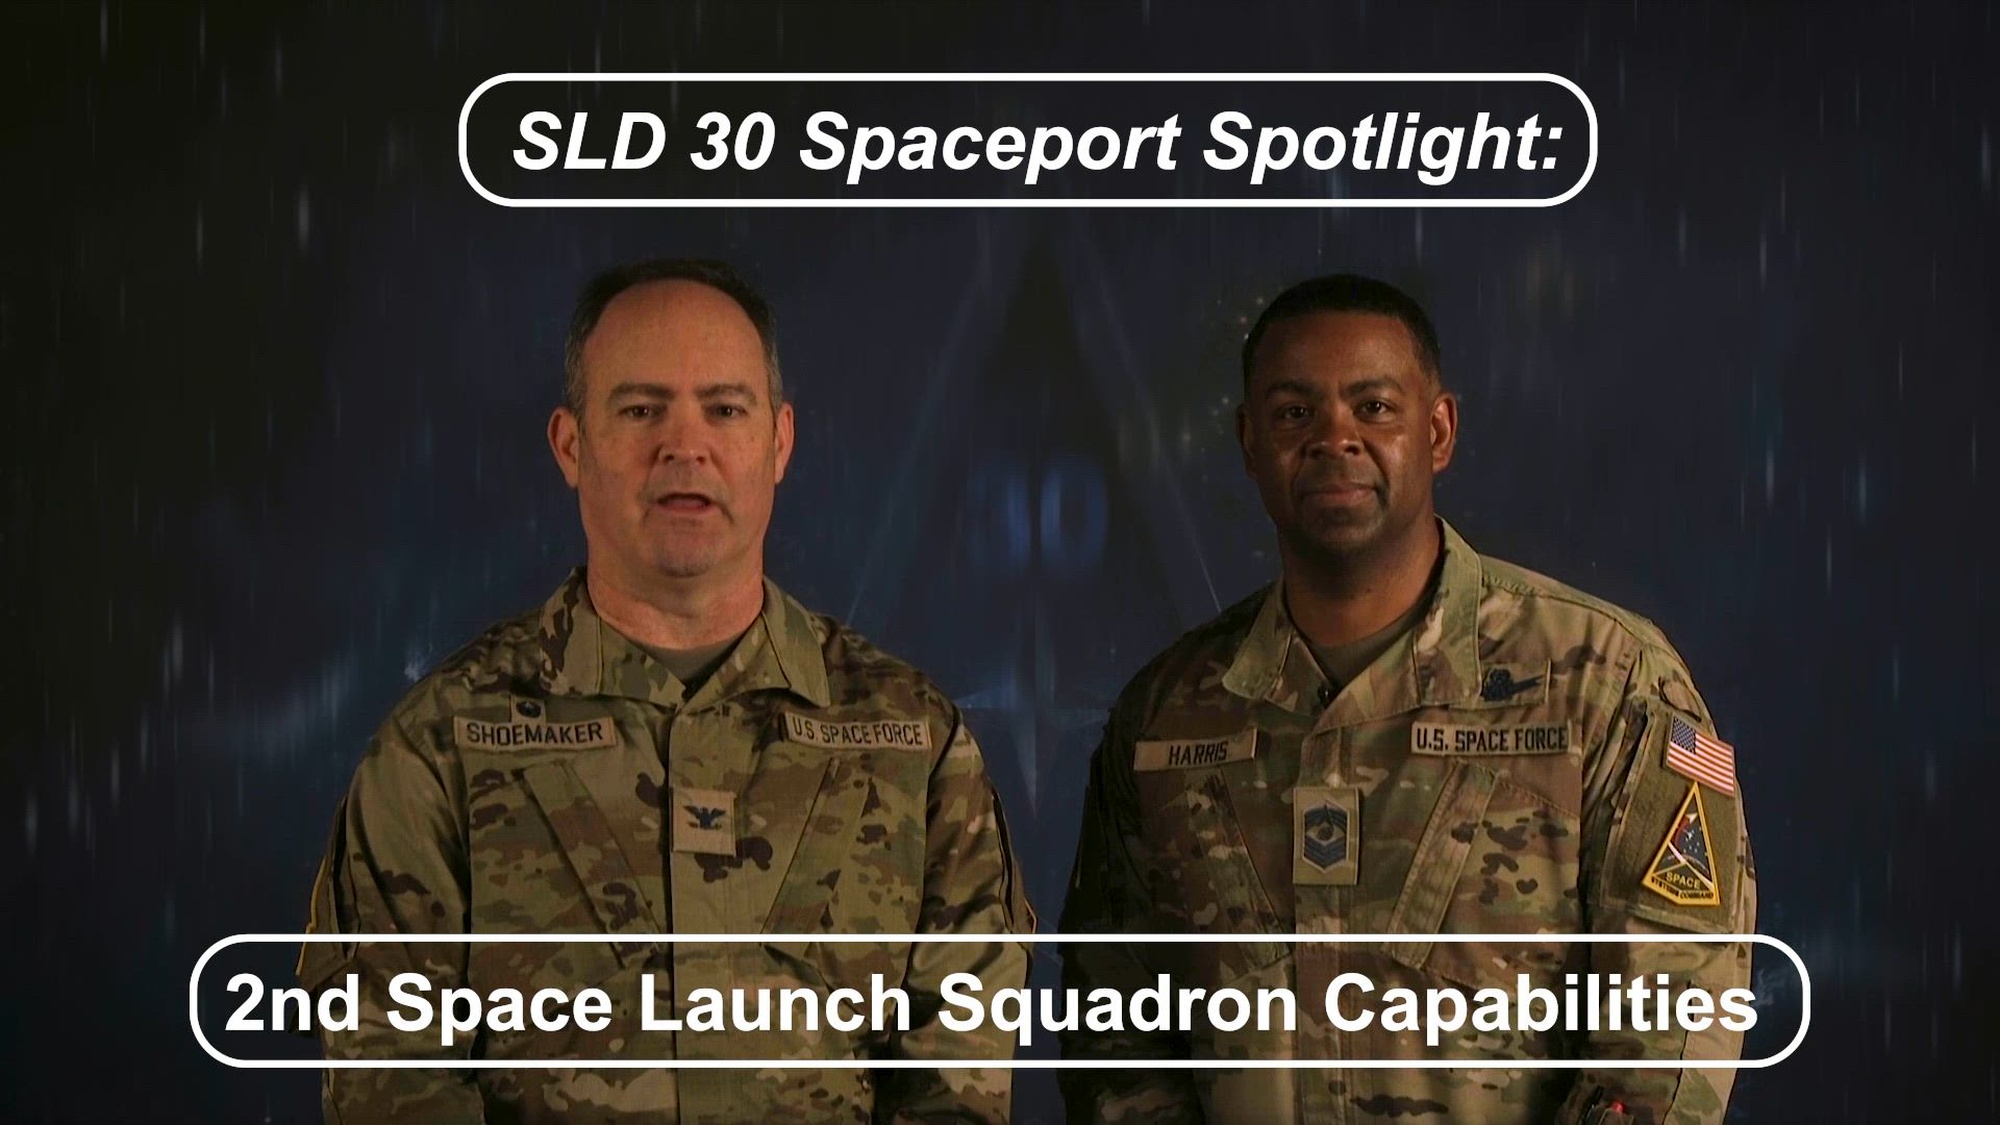 In this iteration of the Spaceport Spotlight, the 2nd Space Launch Squadron which includes the "Space Cowboys", the sole expeditionary unit that specializes in small lift operations, along with the squadron mission integrators and leads speak on their role at the West Coast Spaceport and Test Range, and assuring access to space. (U.S. Space Force Video by Airman 1st Class Ryan Quijas)